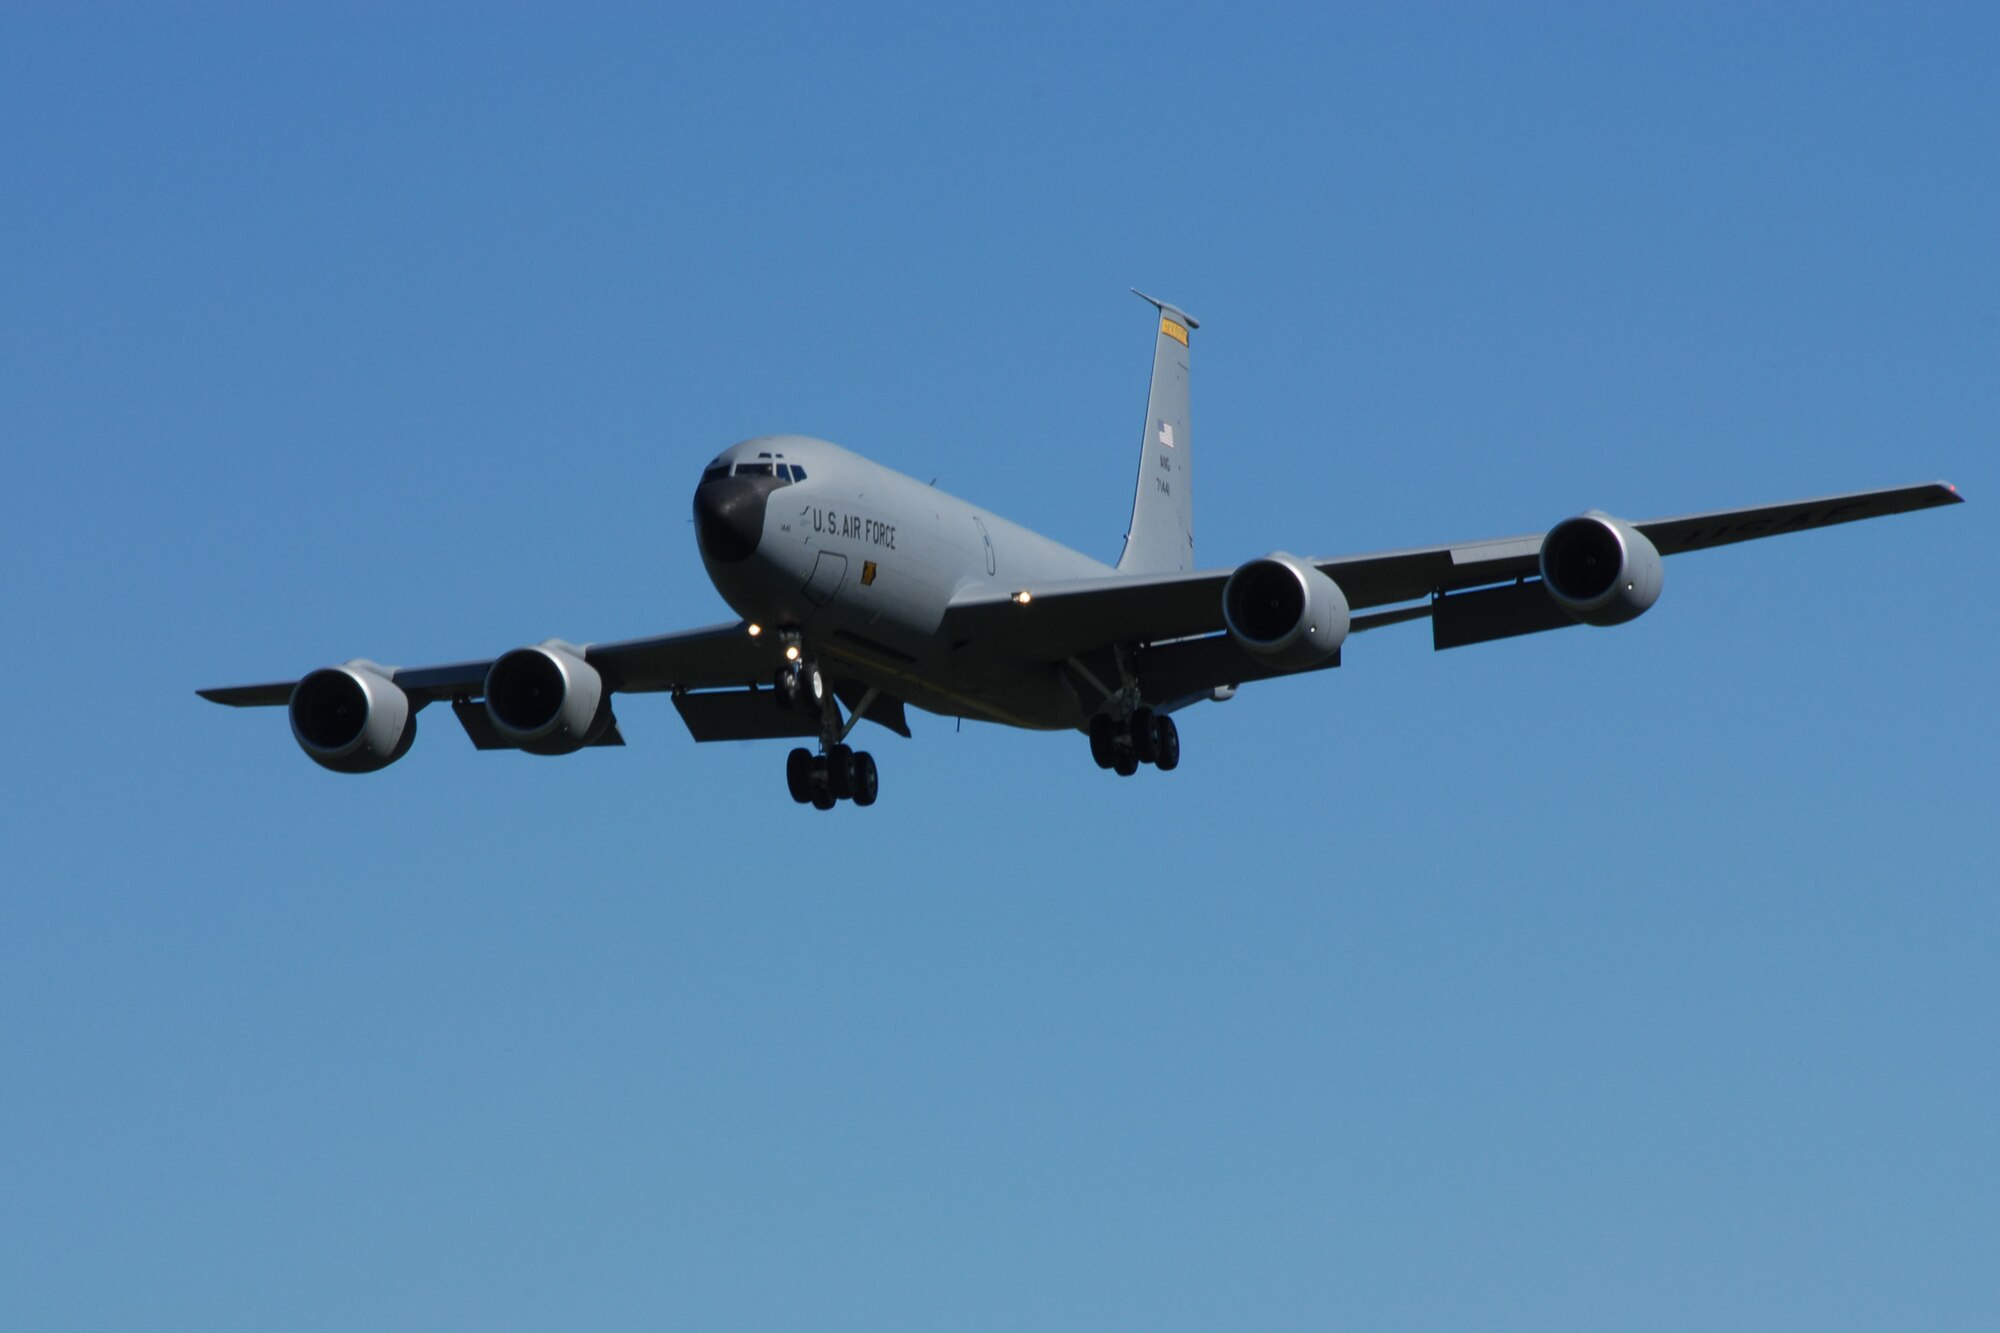 A KC-135R from the Iowa Air National Guard's 185th Air Refueling Wing is on approach at the Sioux City Regional Airport.  The KC-135, a variant of the Boeing 707, is used primarily as a mid air refueling aircraft. The 185th has been flying the KC-135 since 2003.

USAF Photo by MSGT Vincent De Groot 185th ARW Public Affairs
